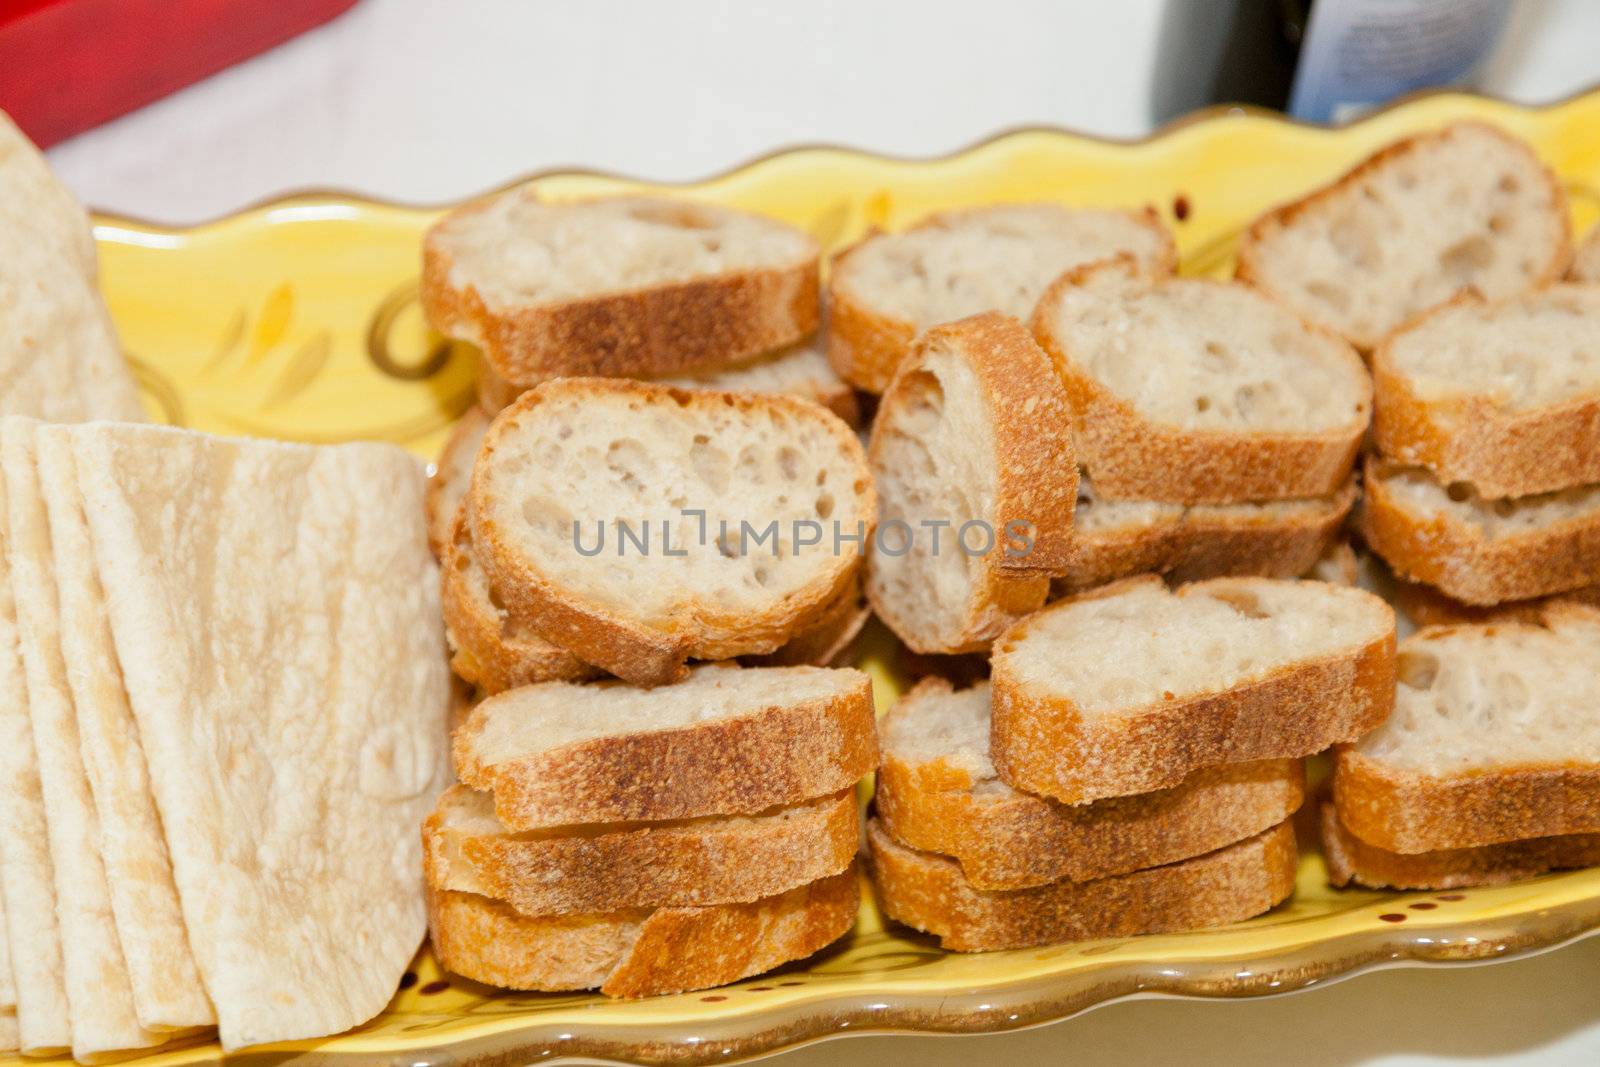 Basket full of various bread slices on a table.